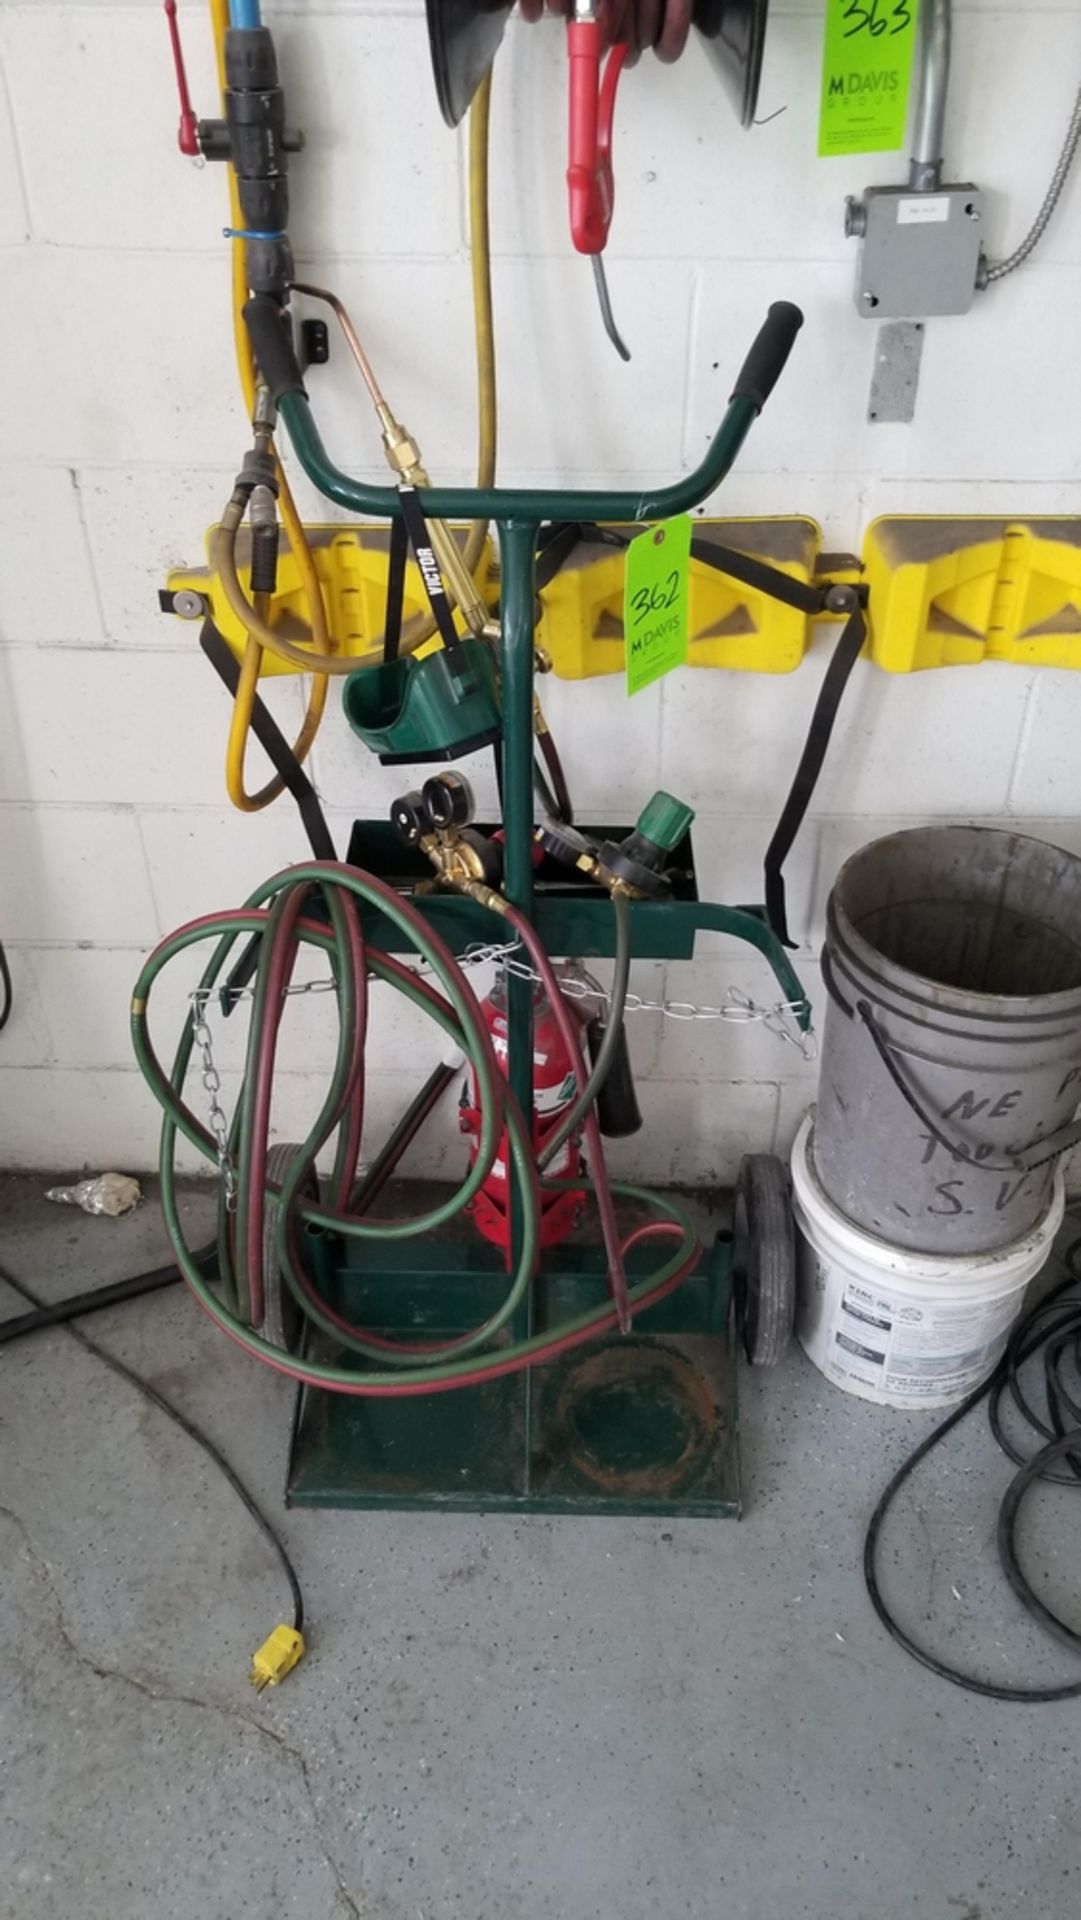 VICTOR Welding Cart w/ Contents including Torch Head, Oxy-acetylene Gauges, Fire Extinguisher, and